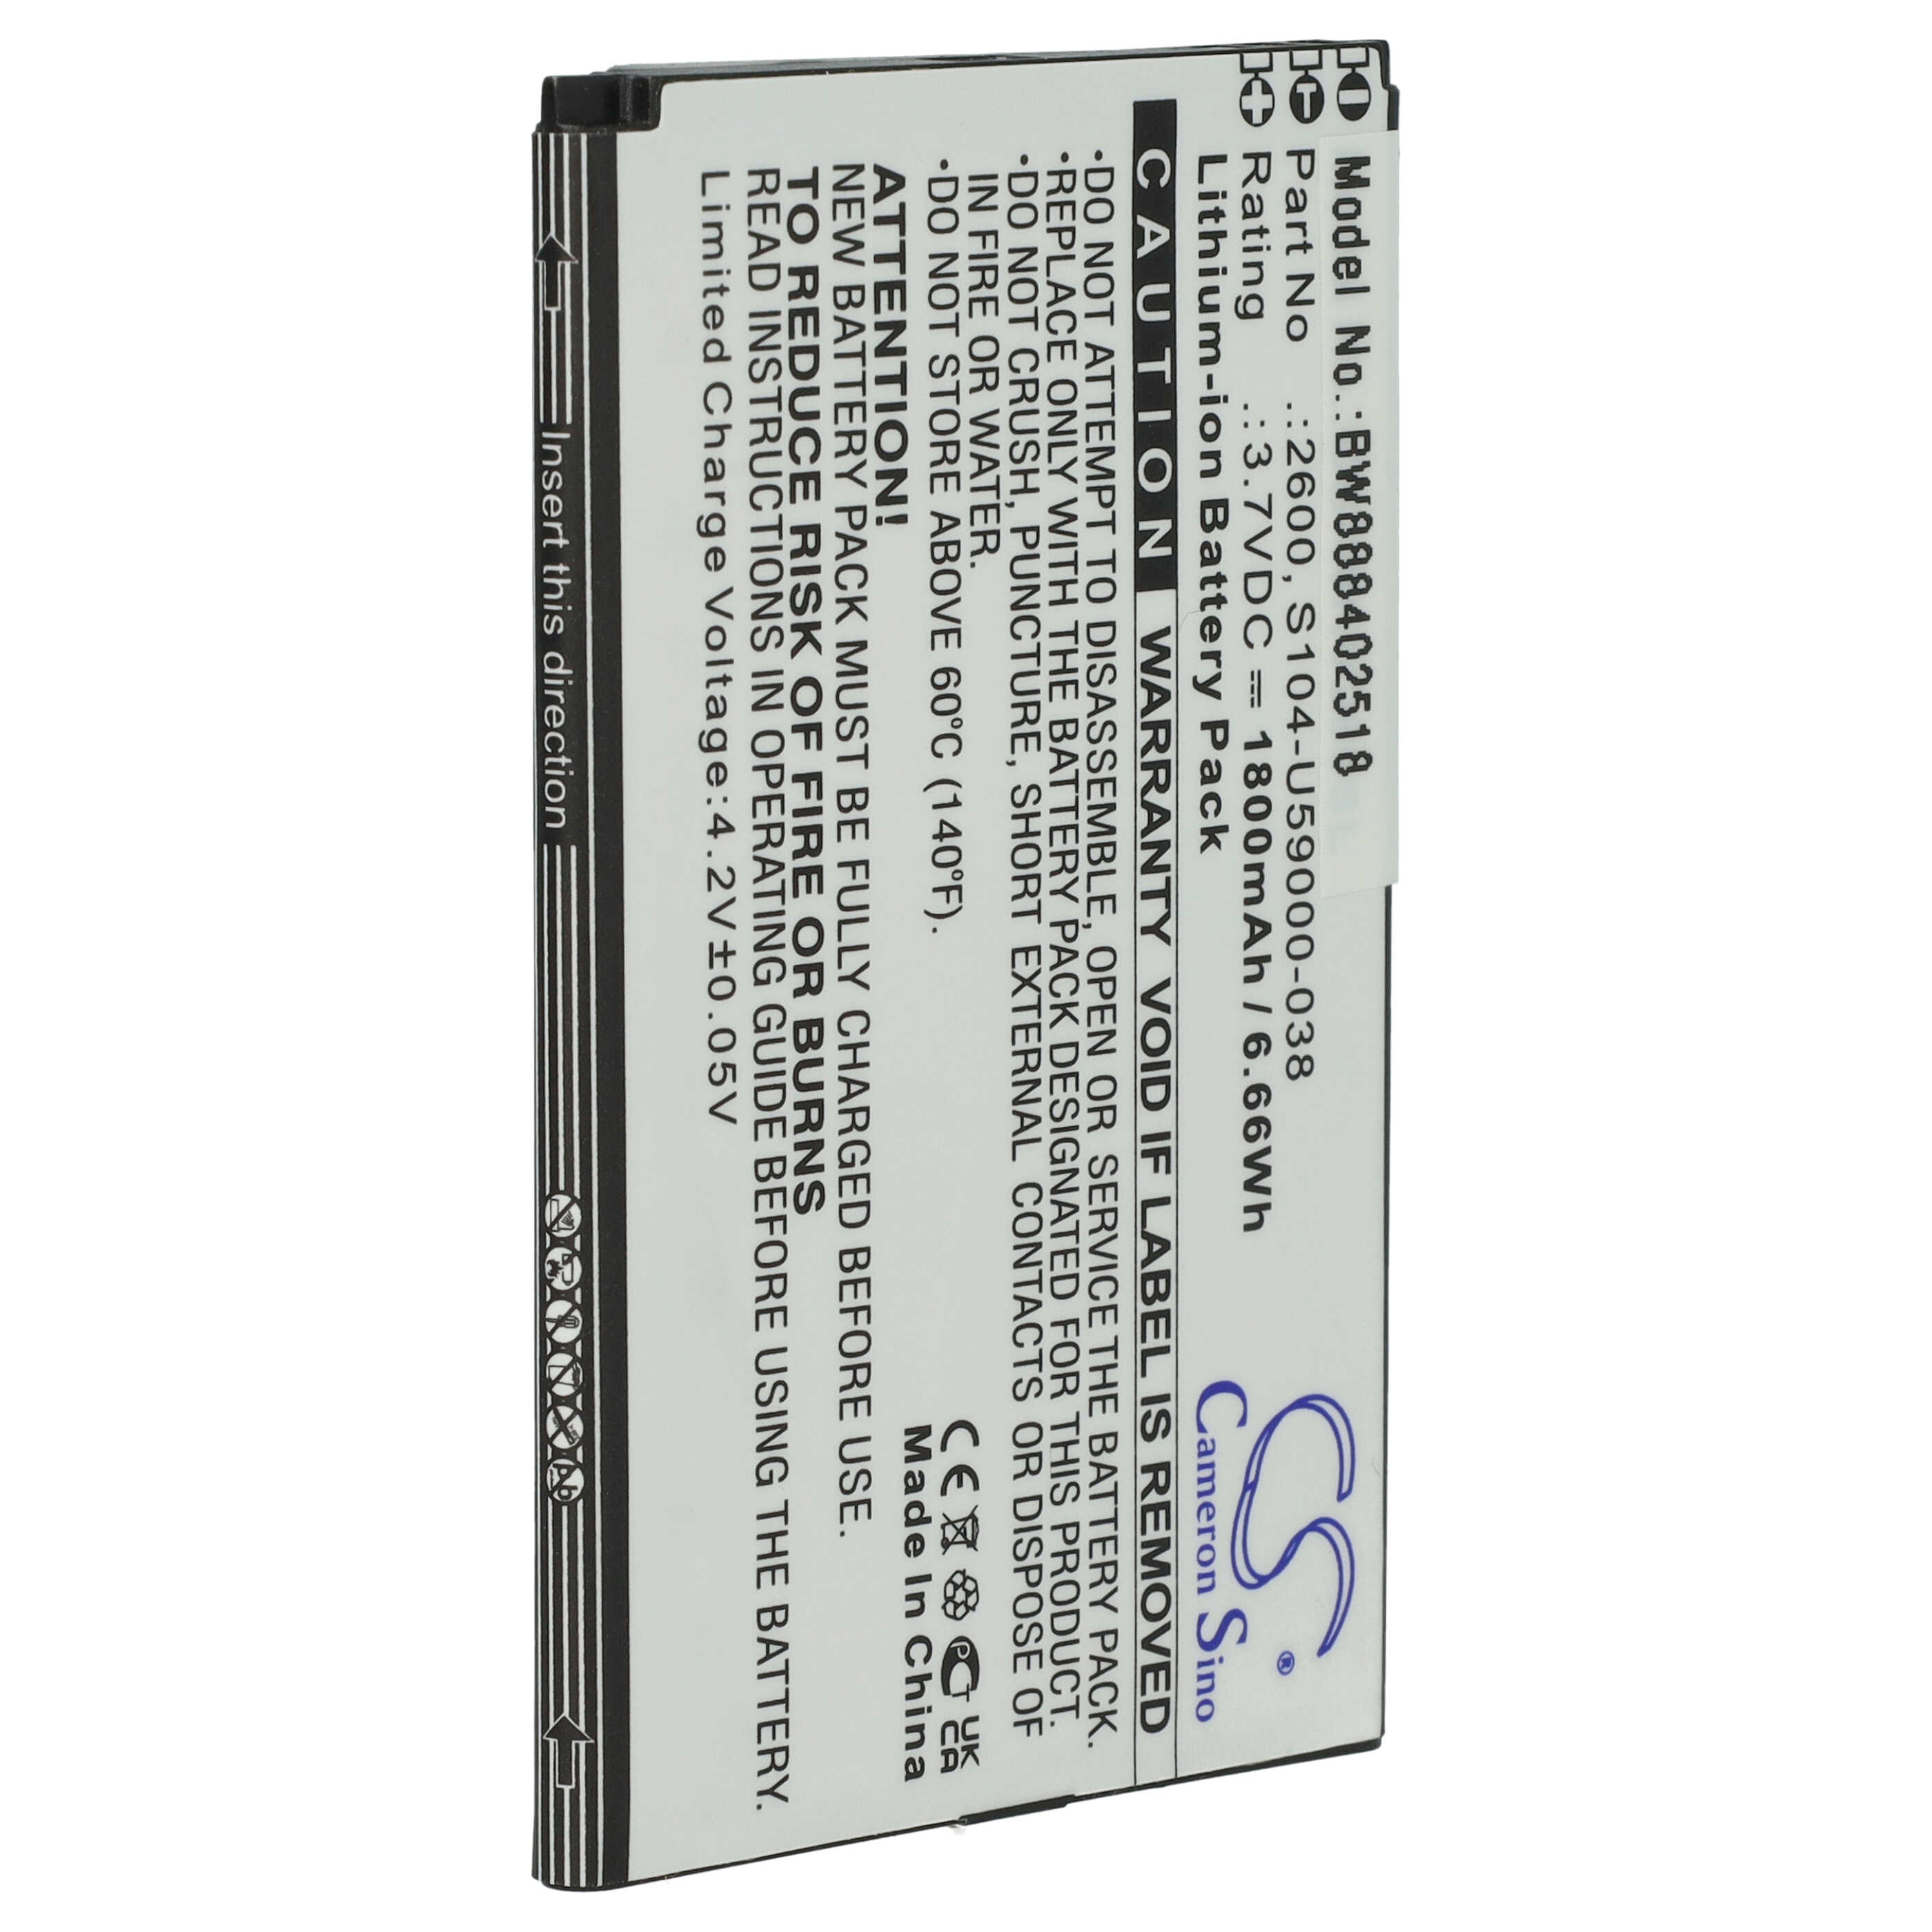 Mobile Phone Battery Replacement for Wiko 2600, S104-U59000-038 - 1800mAh 3.7V Li-Ion